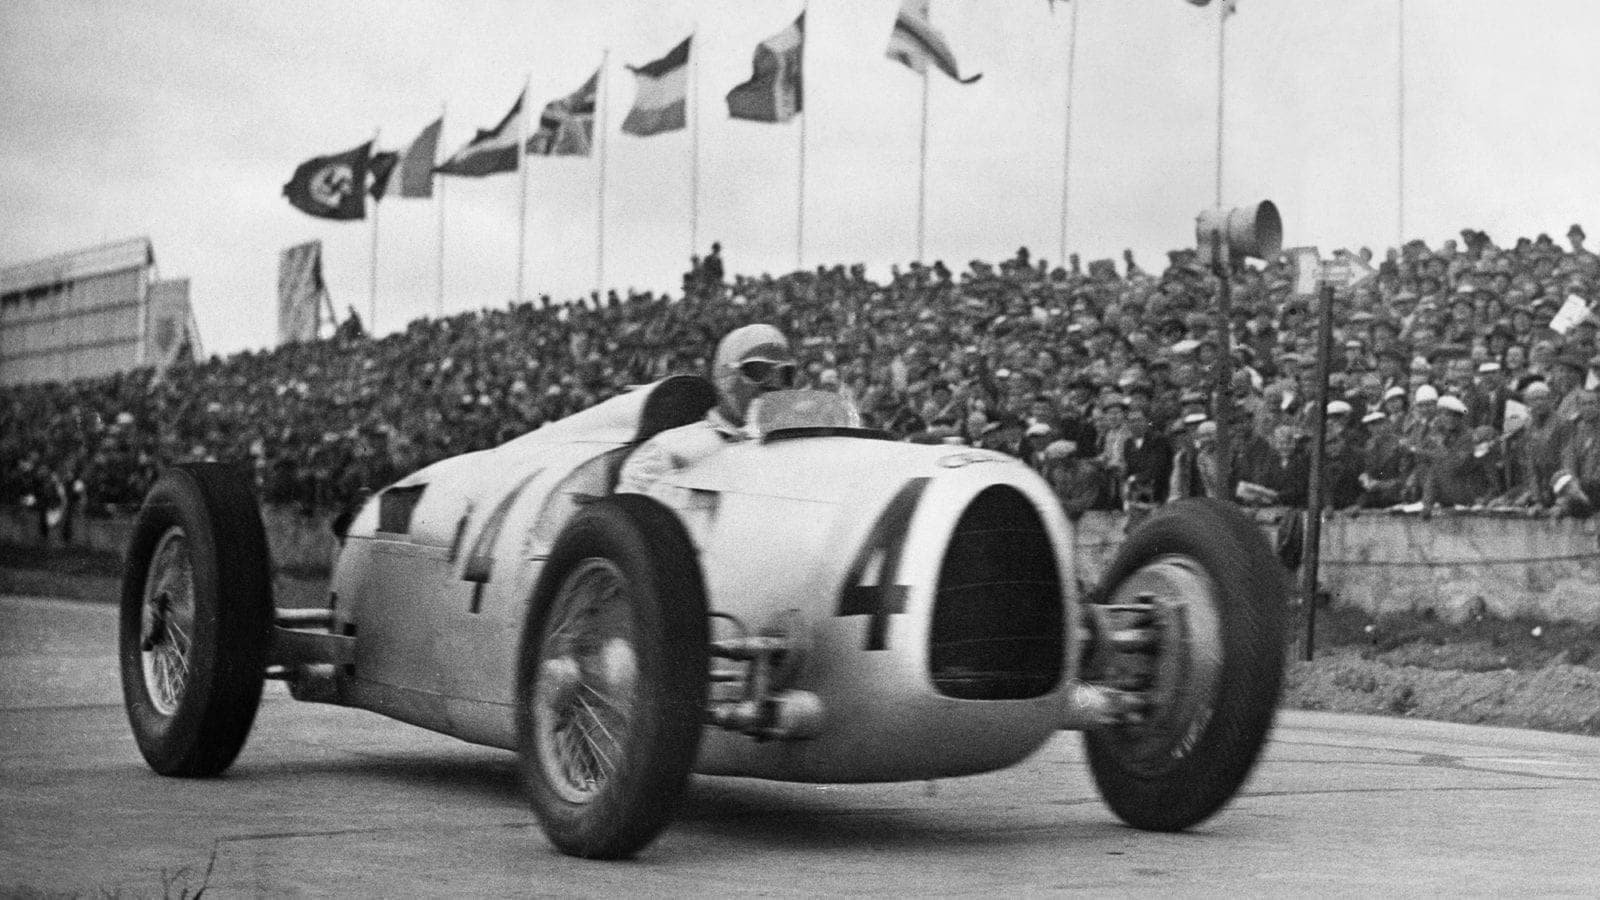 Bernd Rosemeyer for Auto Union in the 1936 German Grand Prix at the Nurburgring